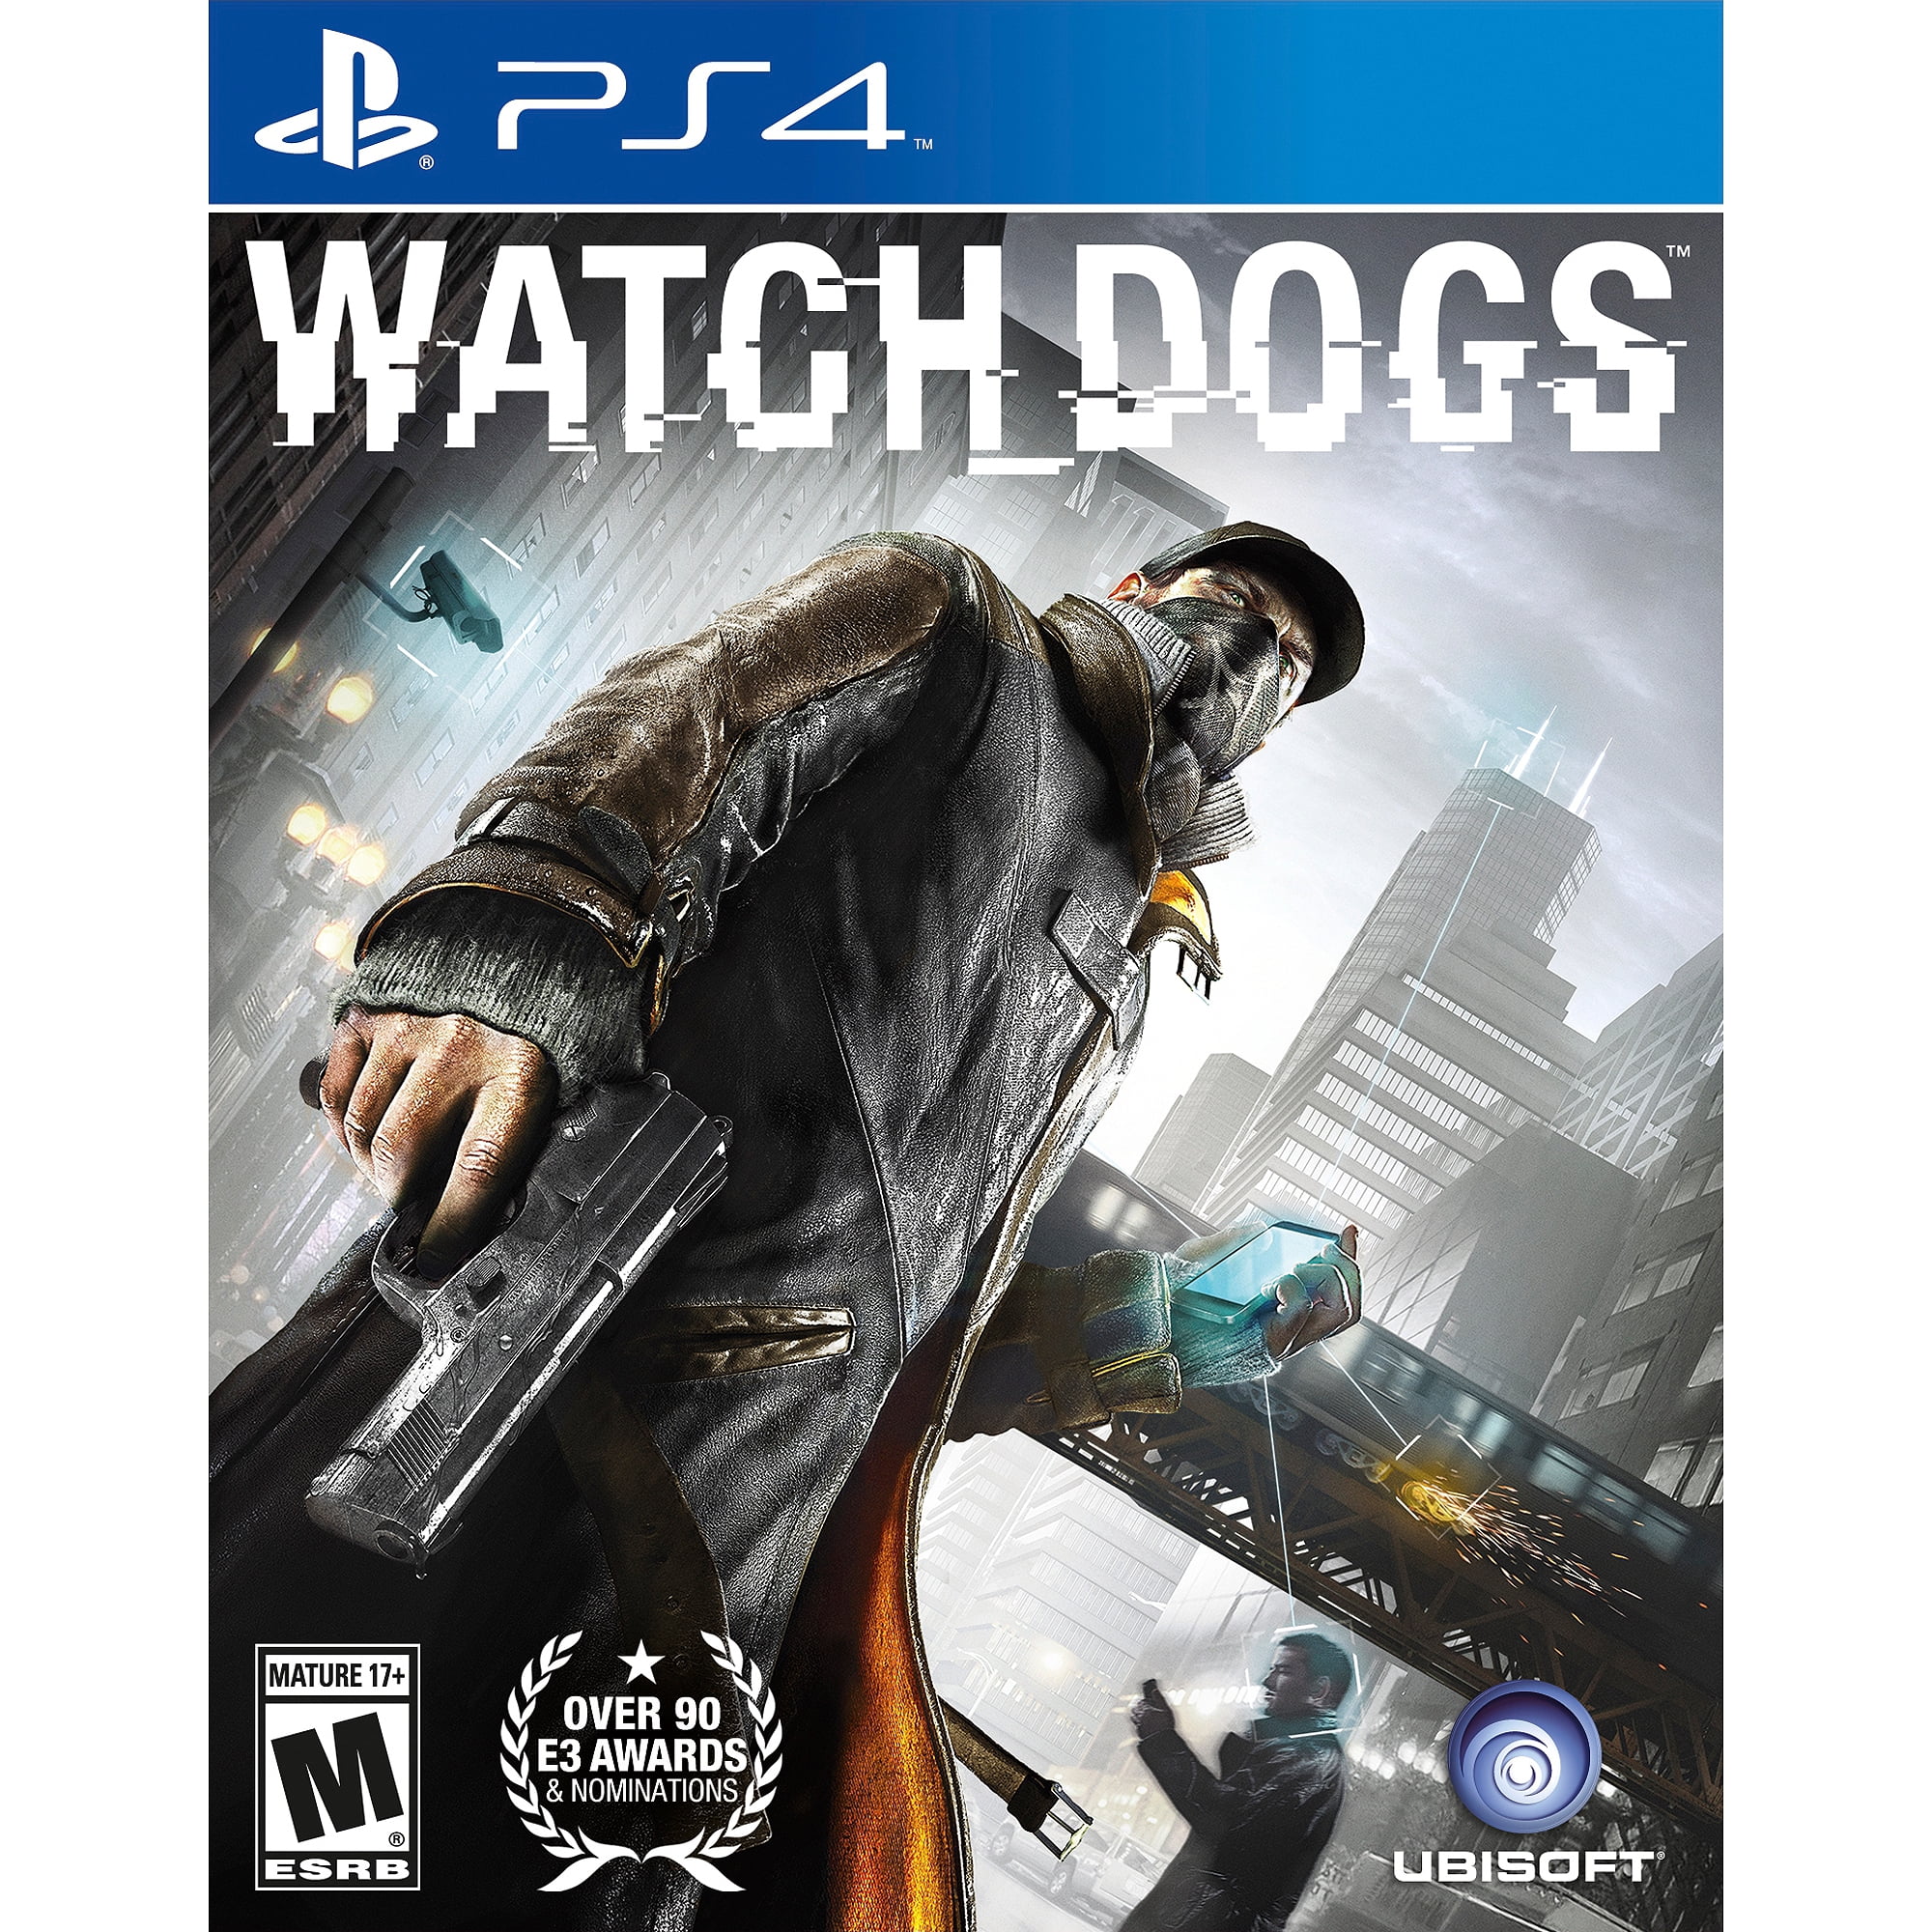 watch dogs 2 ps4 release date